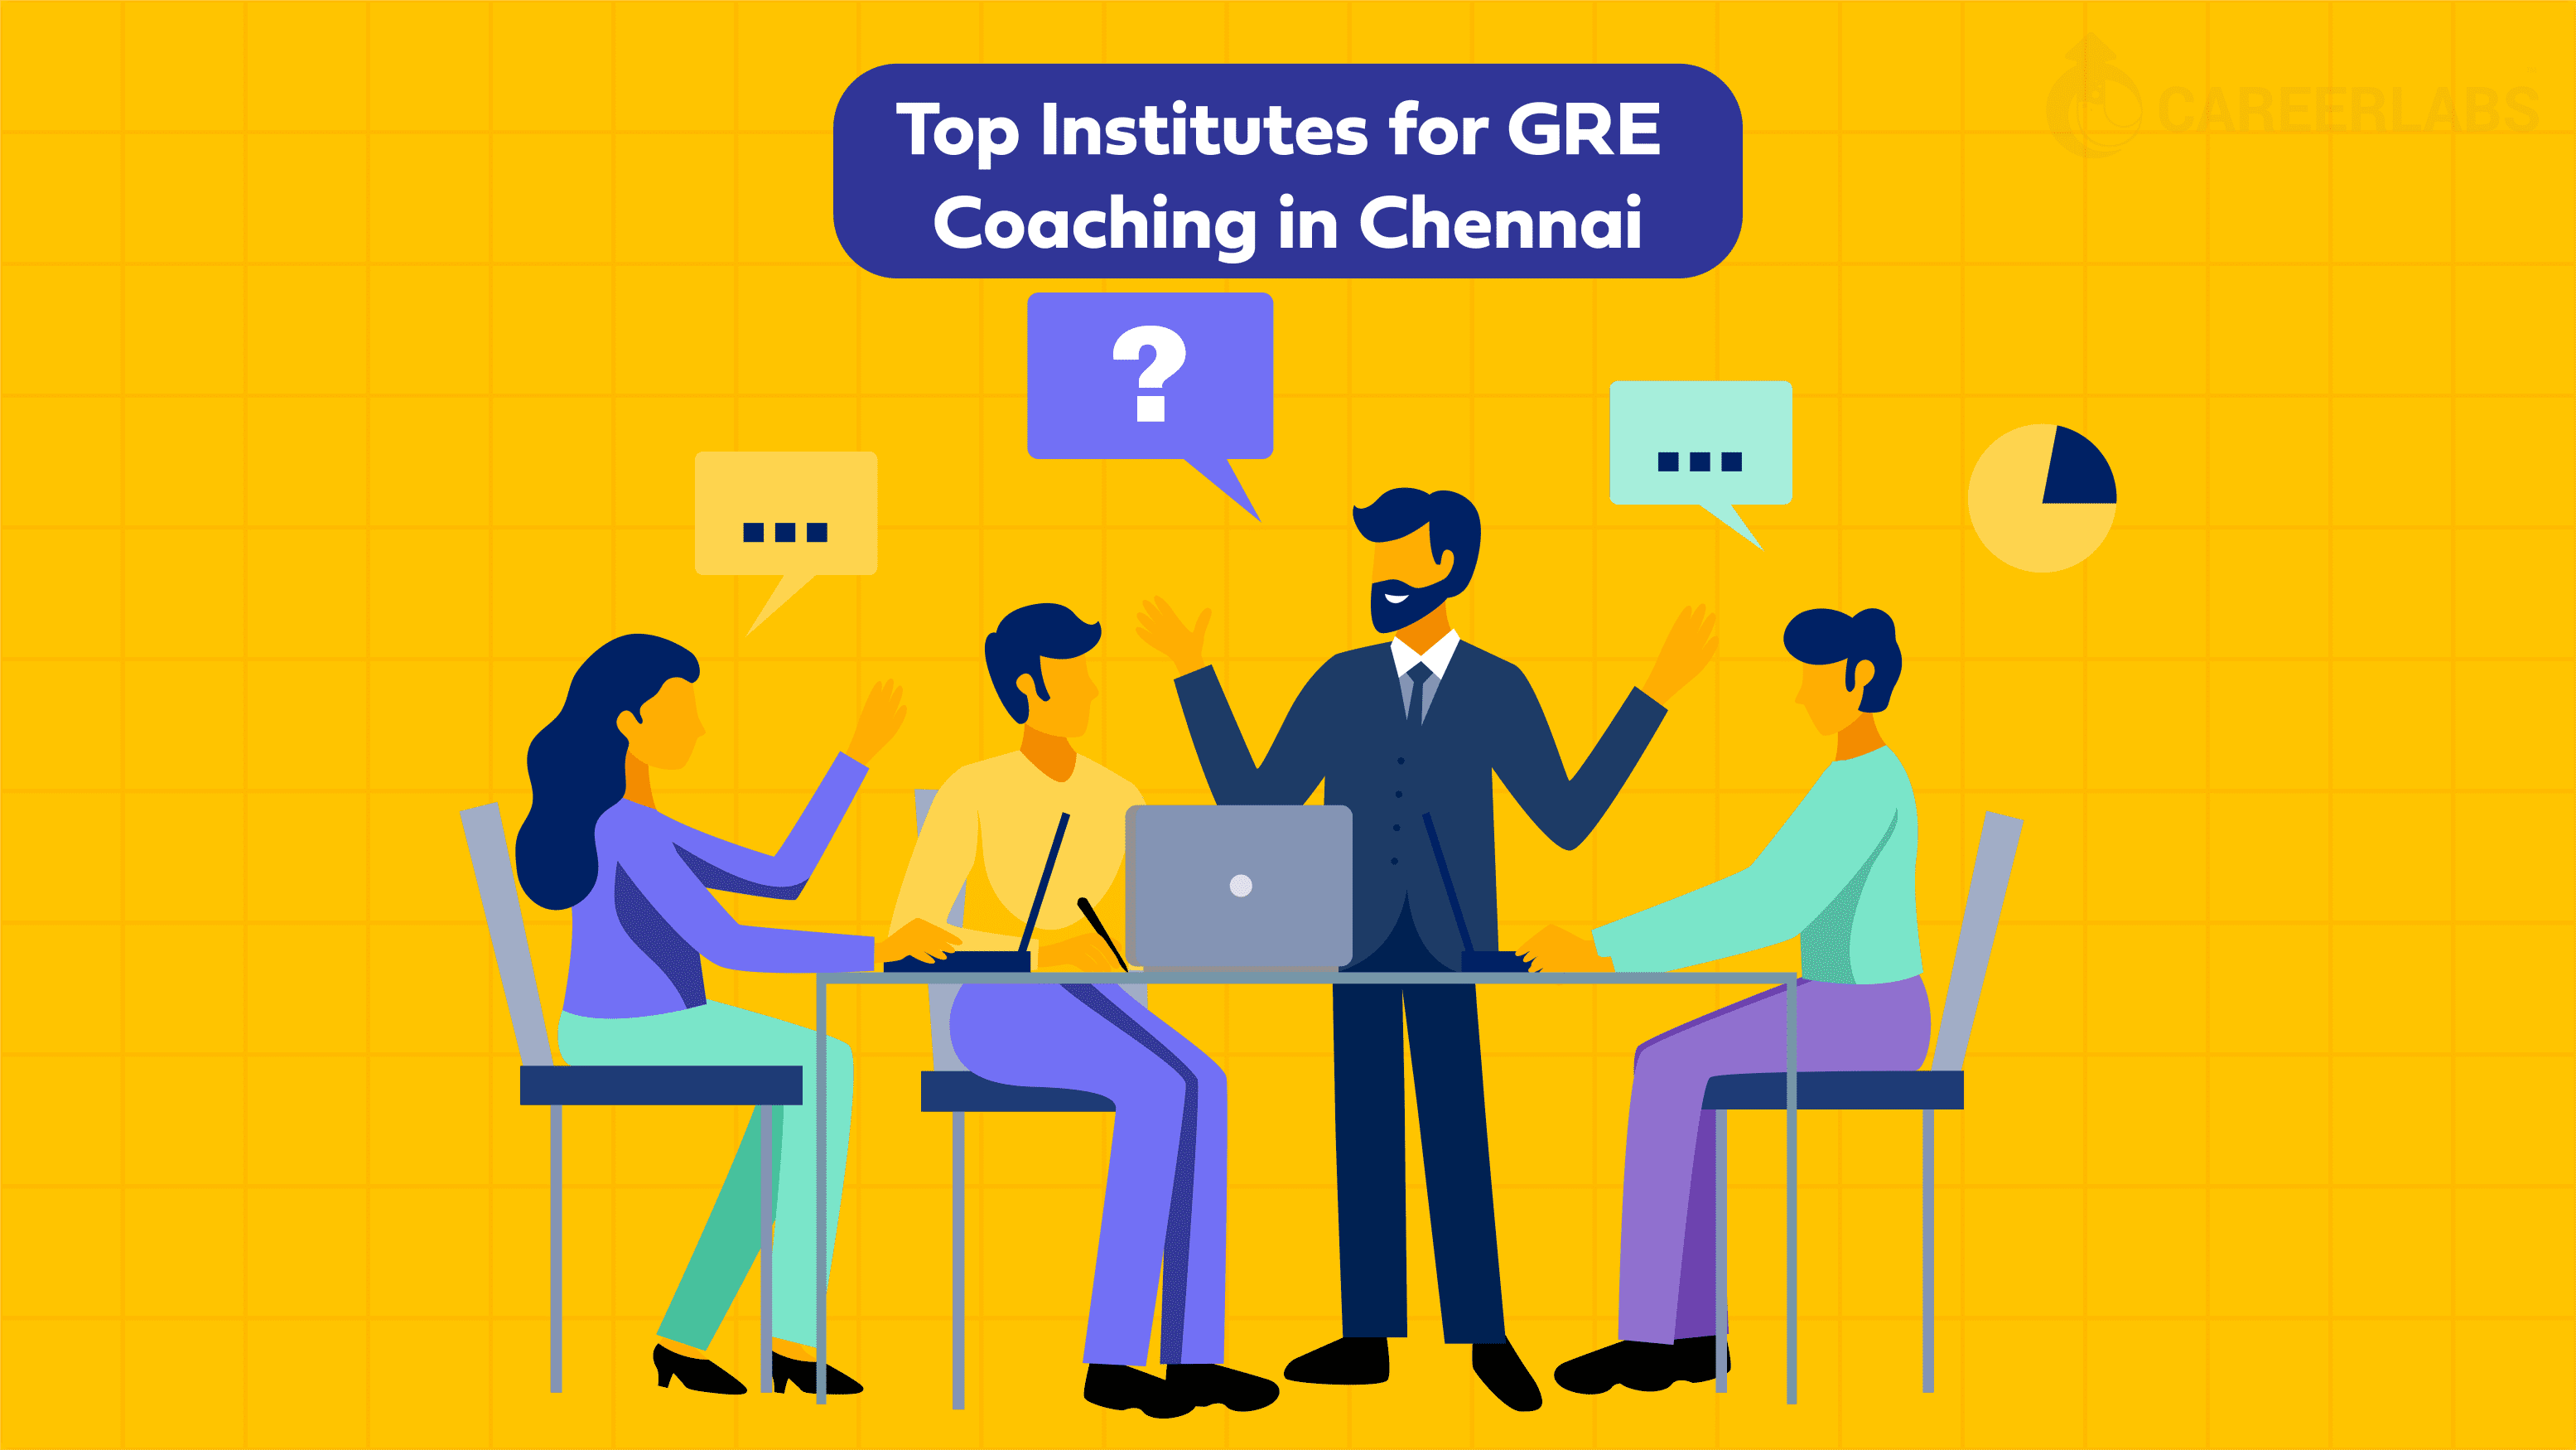 Top Institutes for GRE Coaching in Chennai